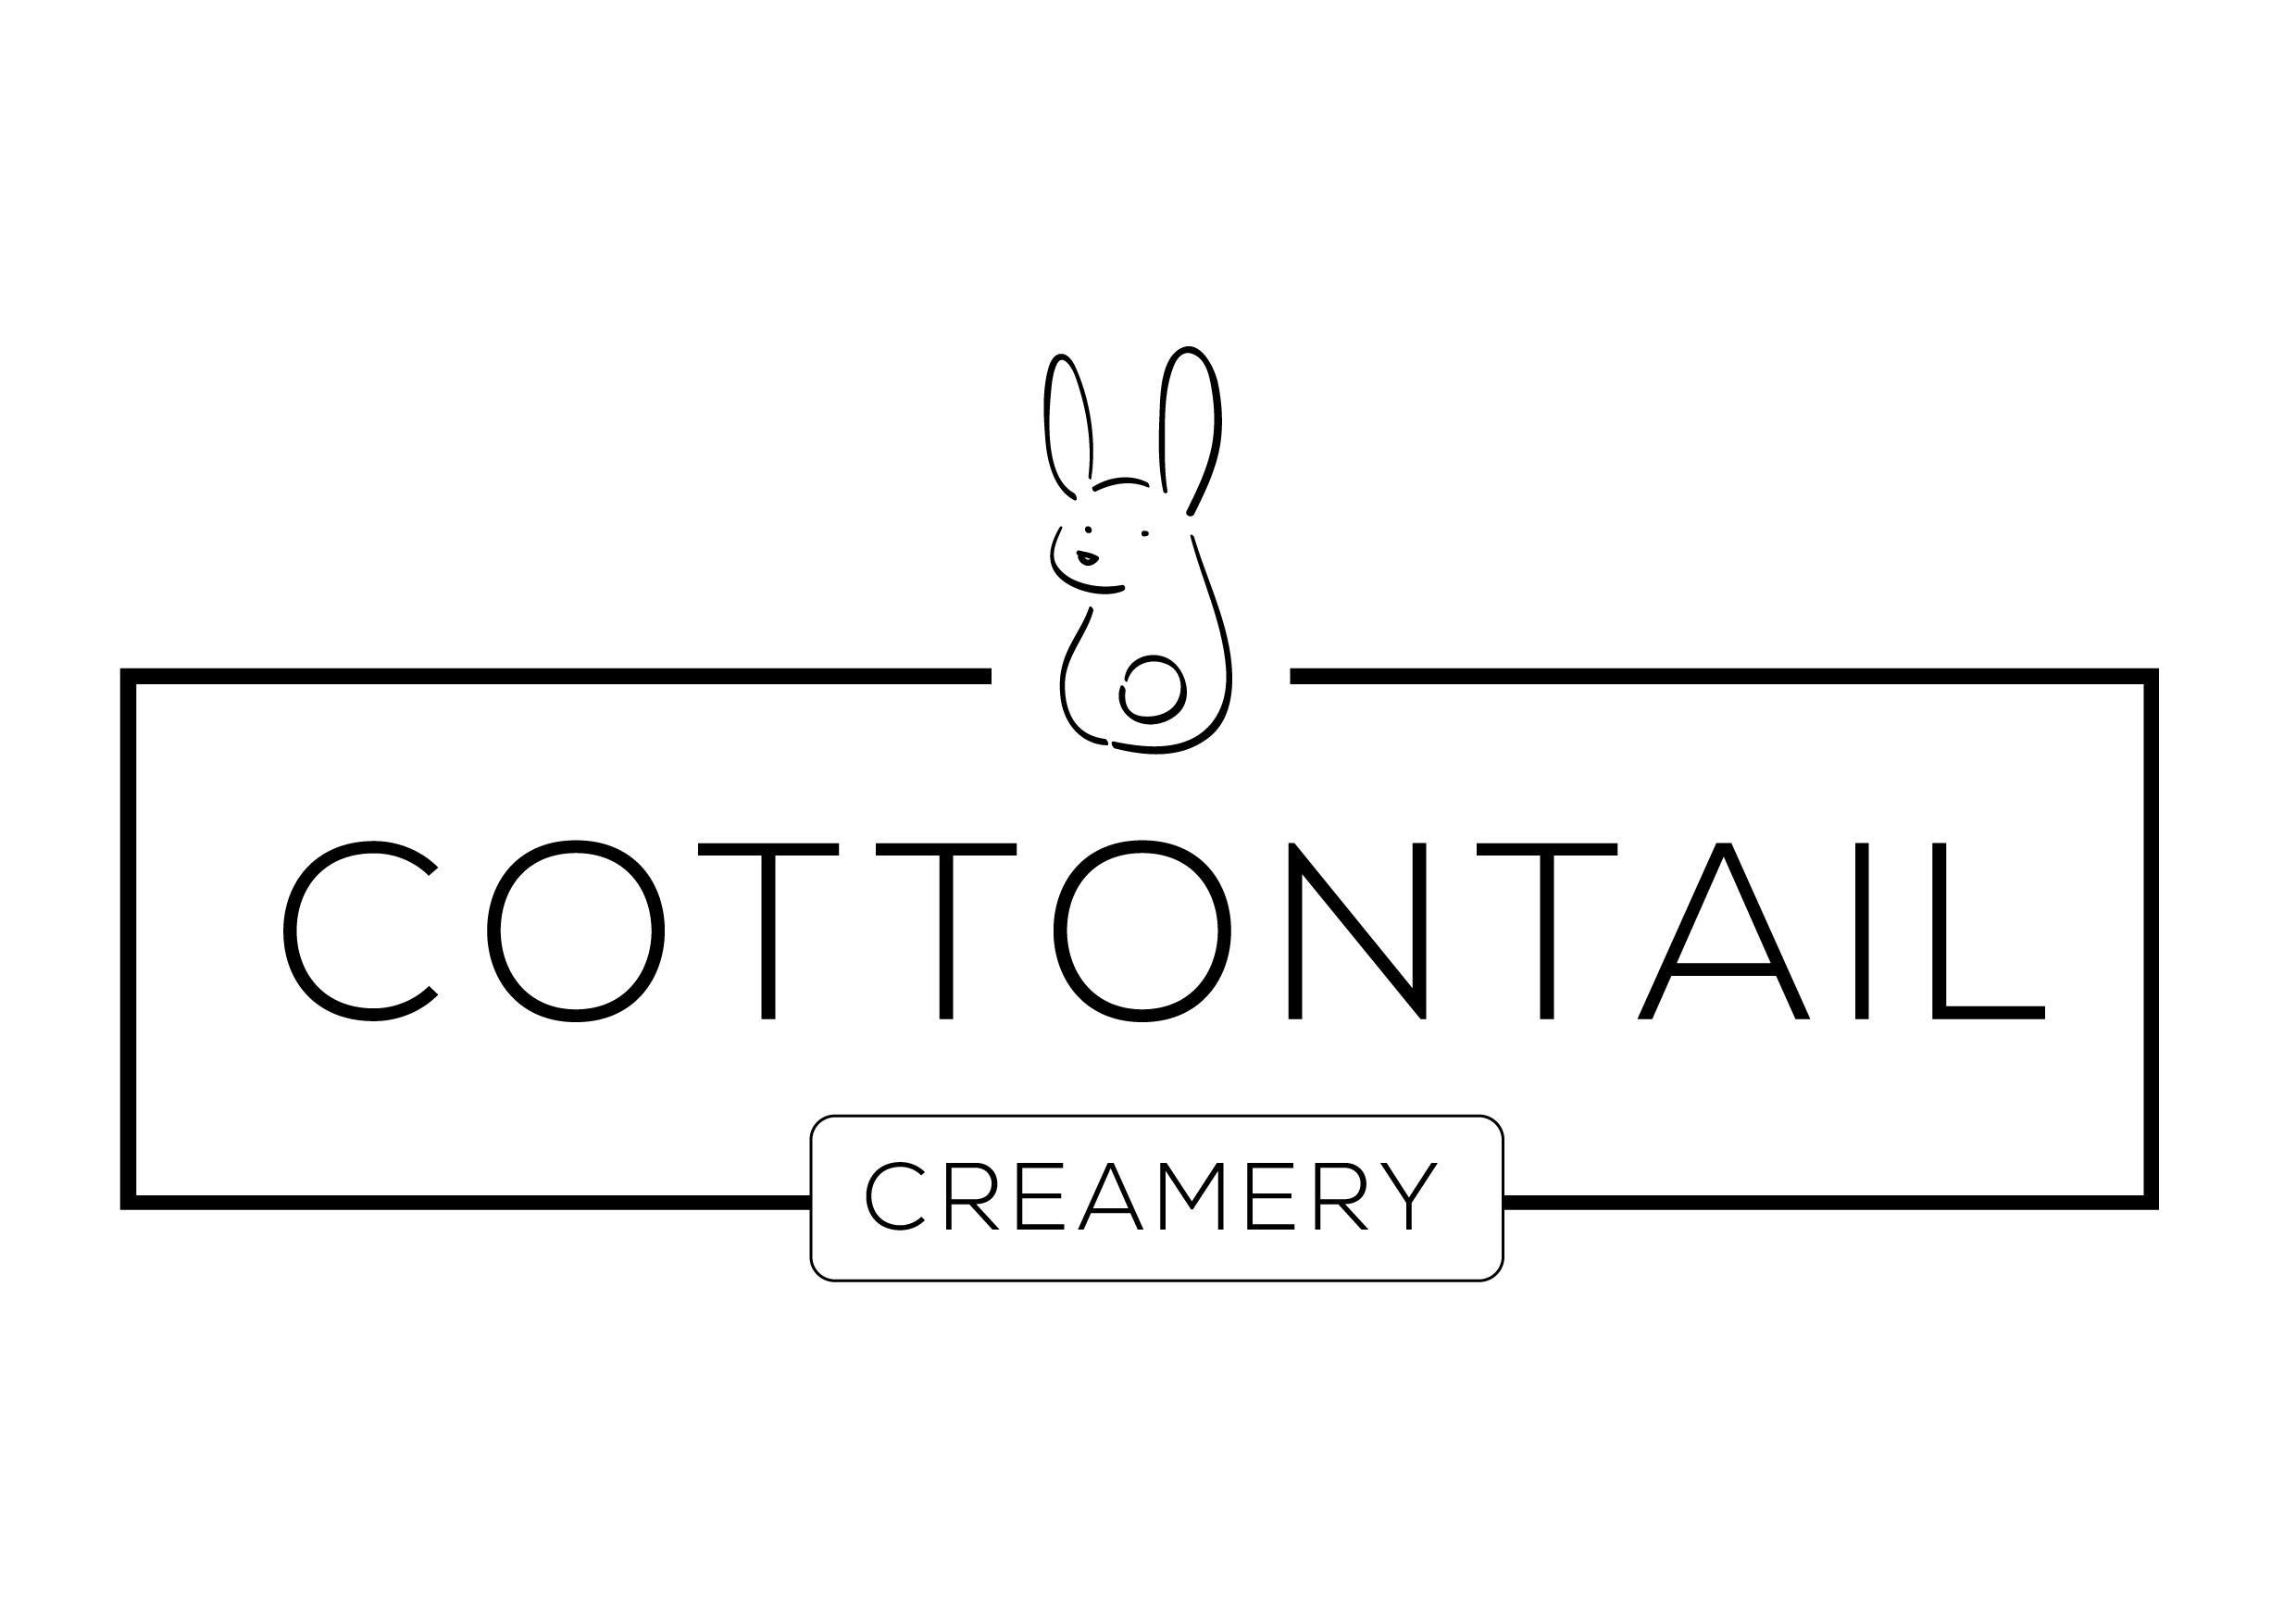 Cottontail Creamery